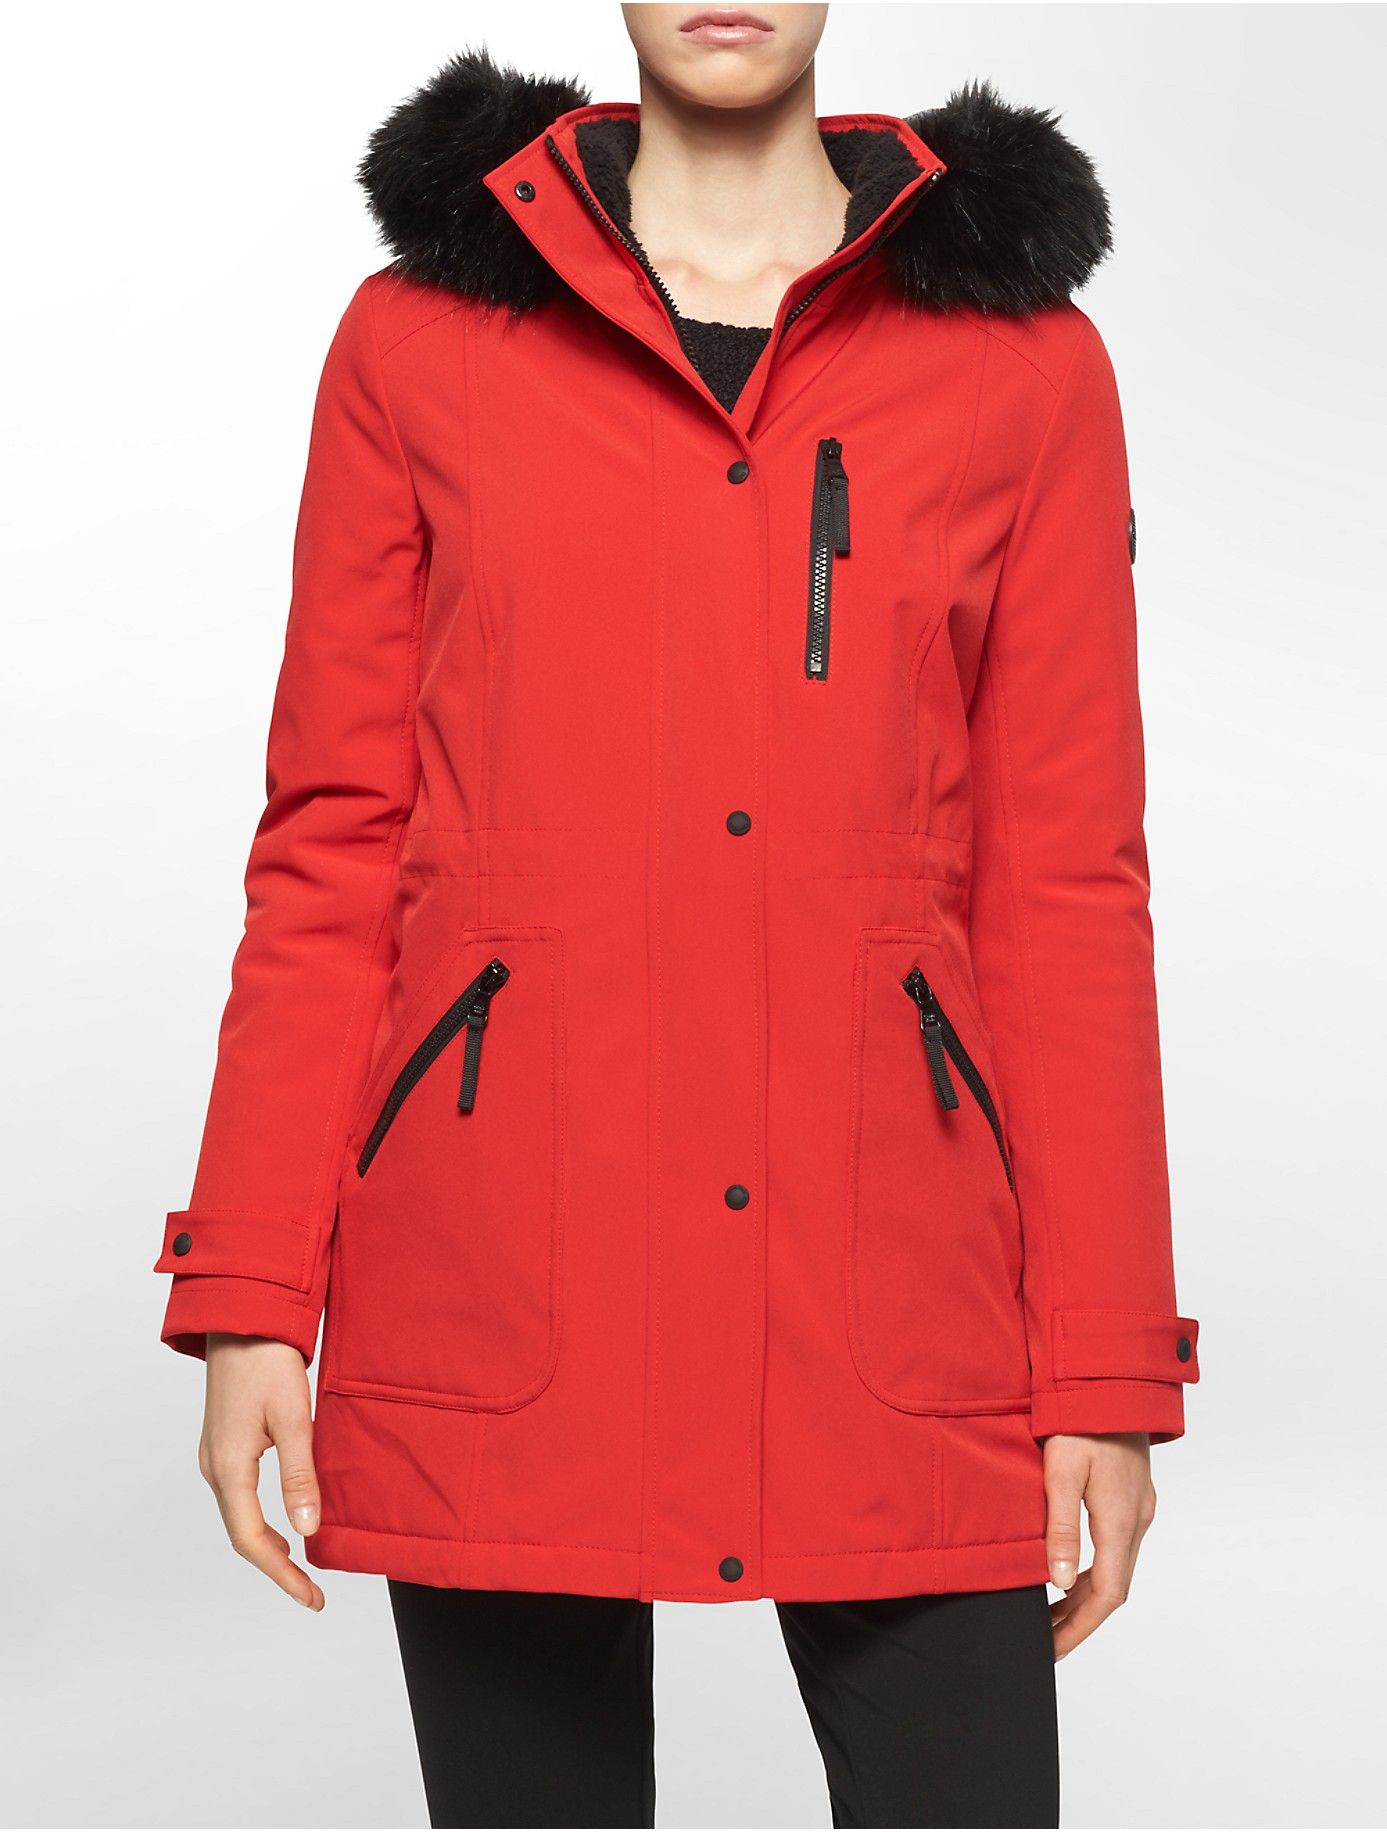 Lyst - Calvin klein White Label Soft Shell Faux Fur Hooded Parka in Red